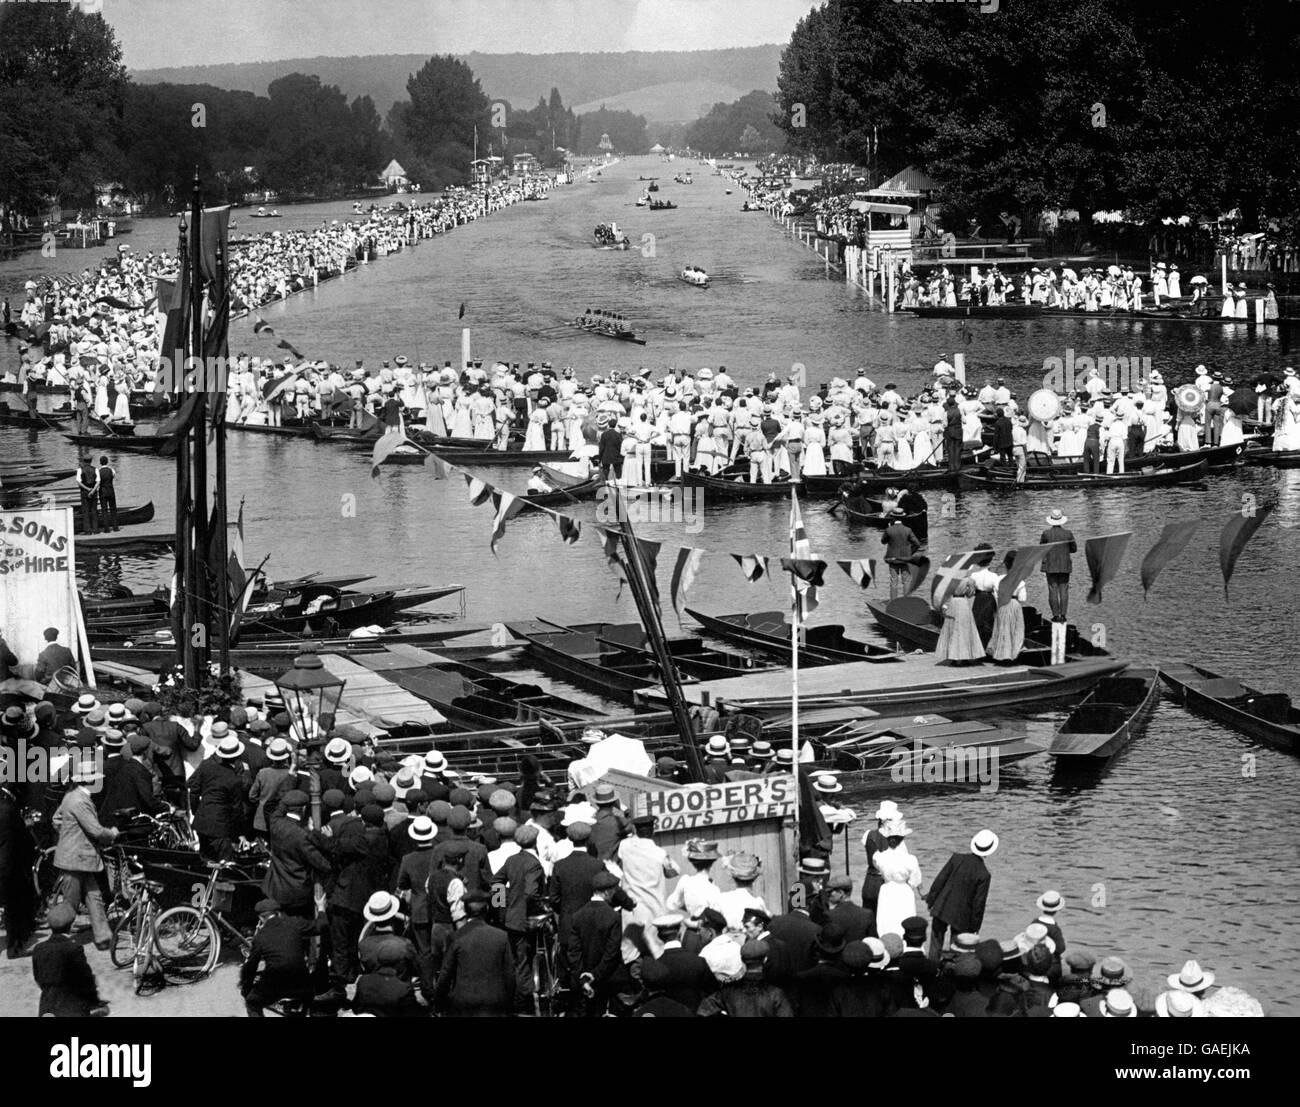 Summer Olympic Games 1908 - Rowing - Coxed Eights - Final - Henley Stock Photo